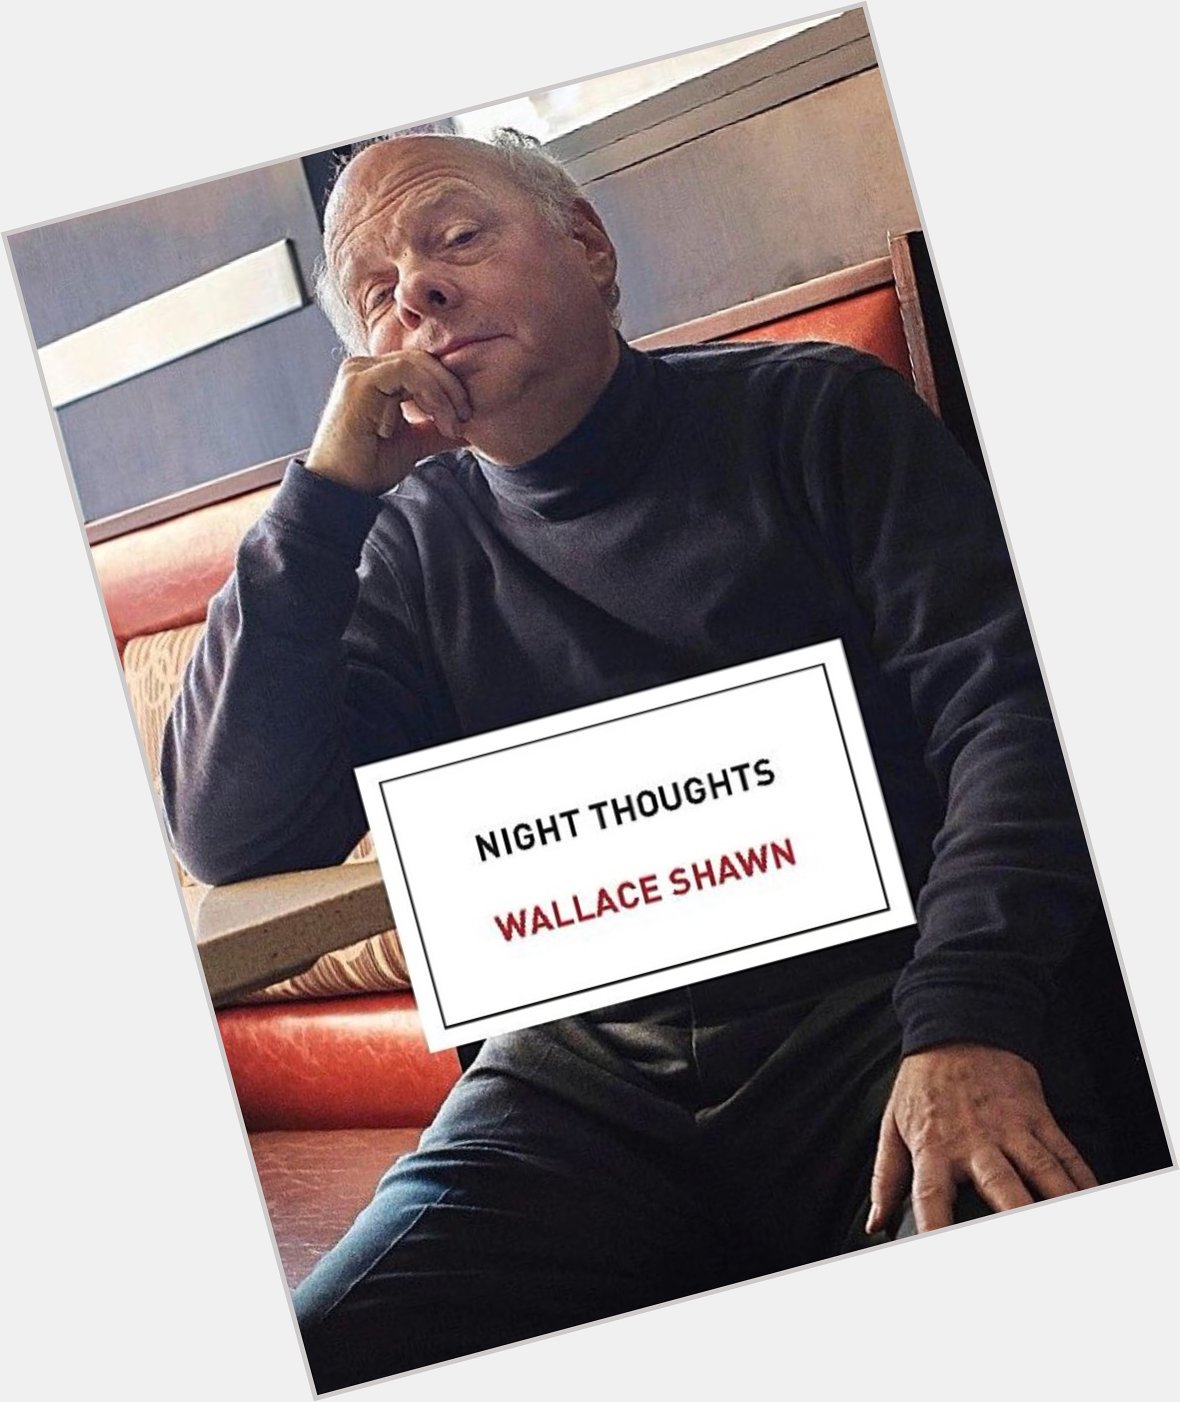 Happy birthday to Wallace Shawn, whose essays and plays are a consistent delight. 